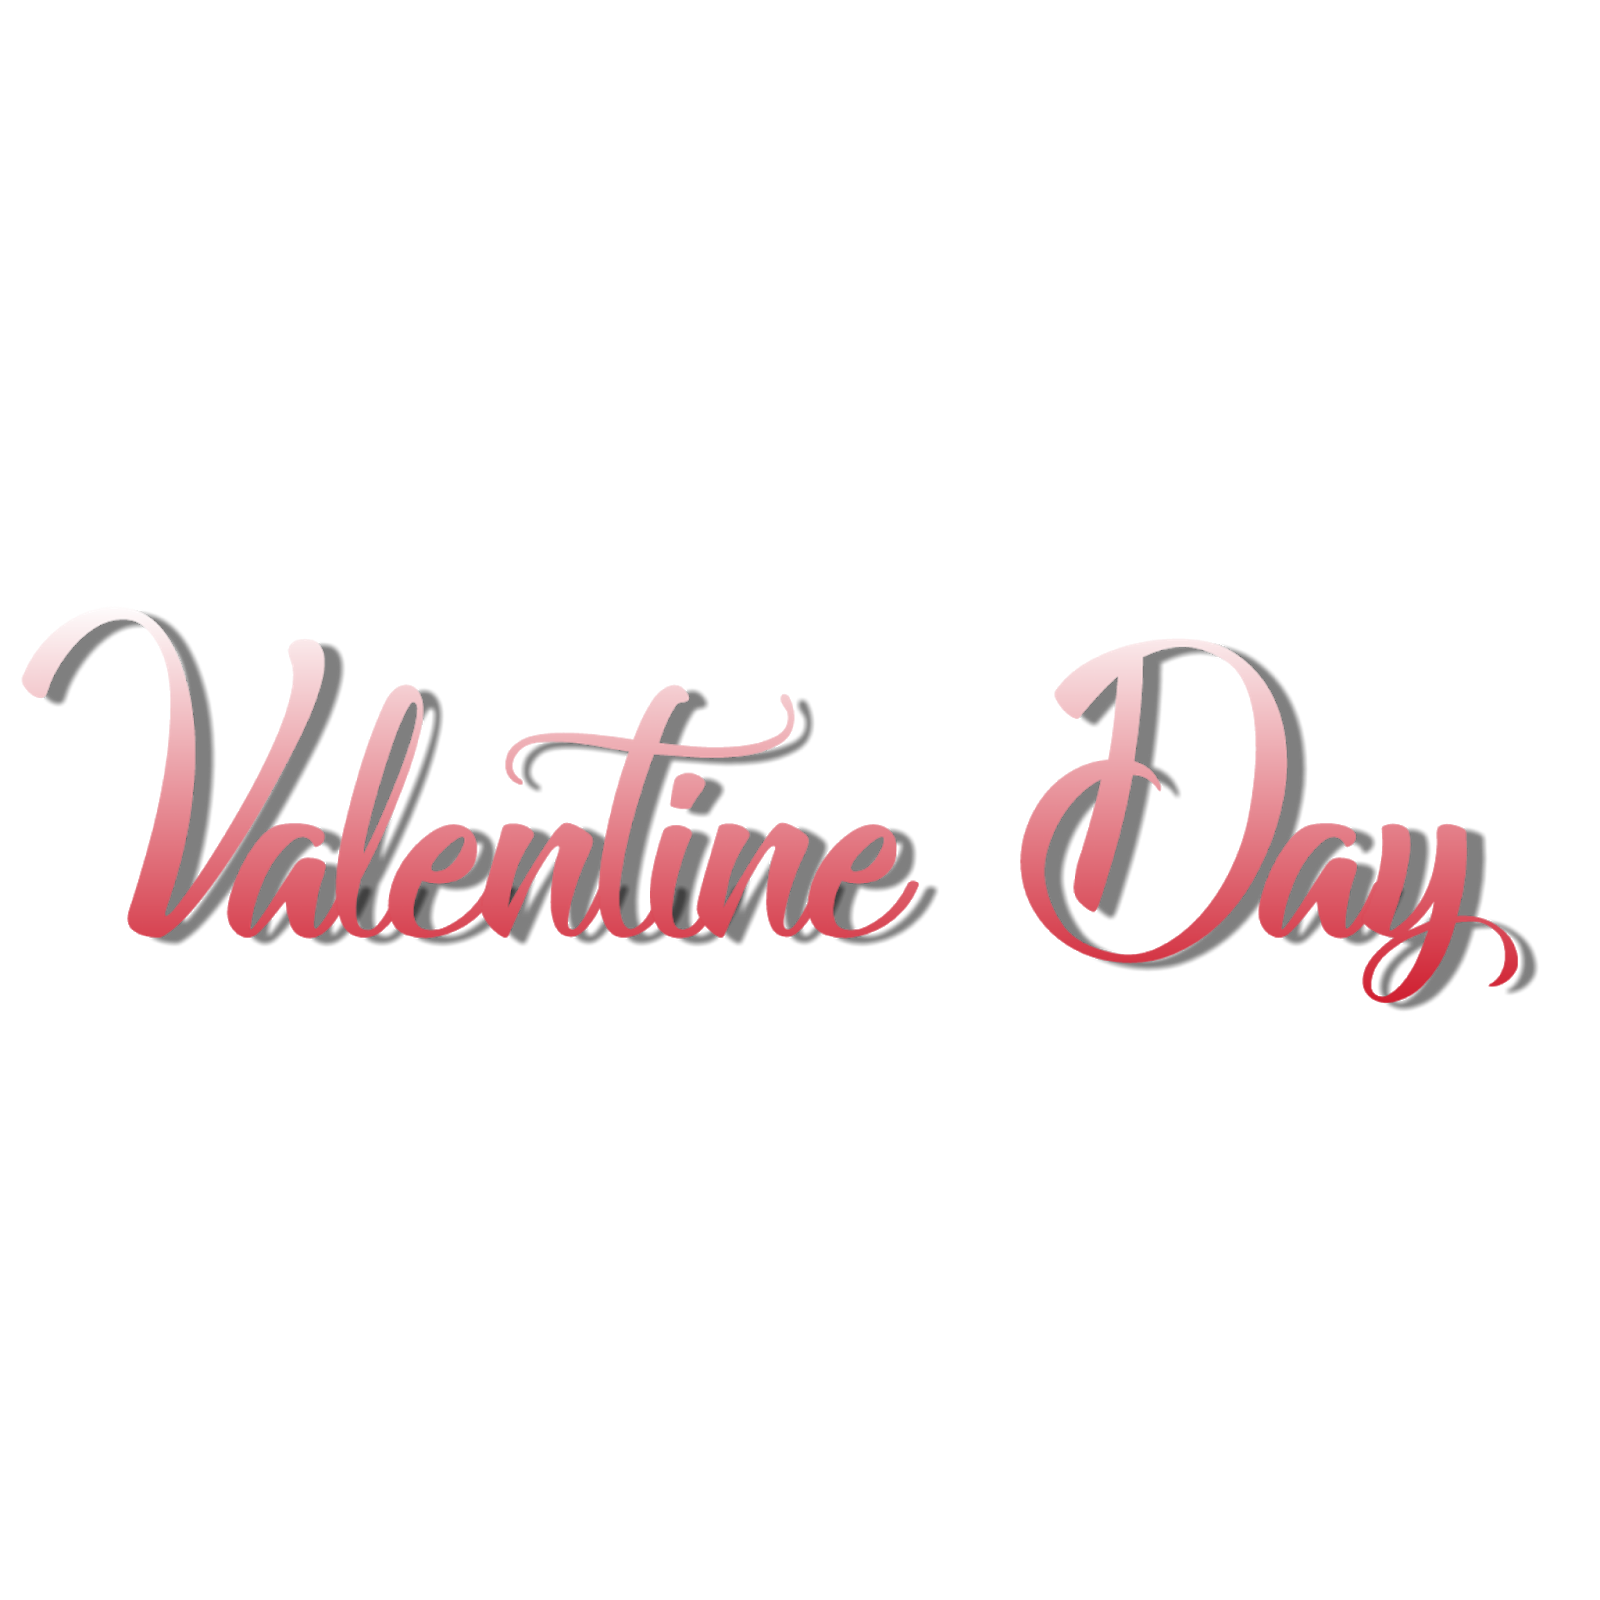 Text Valentines Banner Day Free Download PNG HQ PNG Image